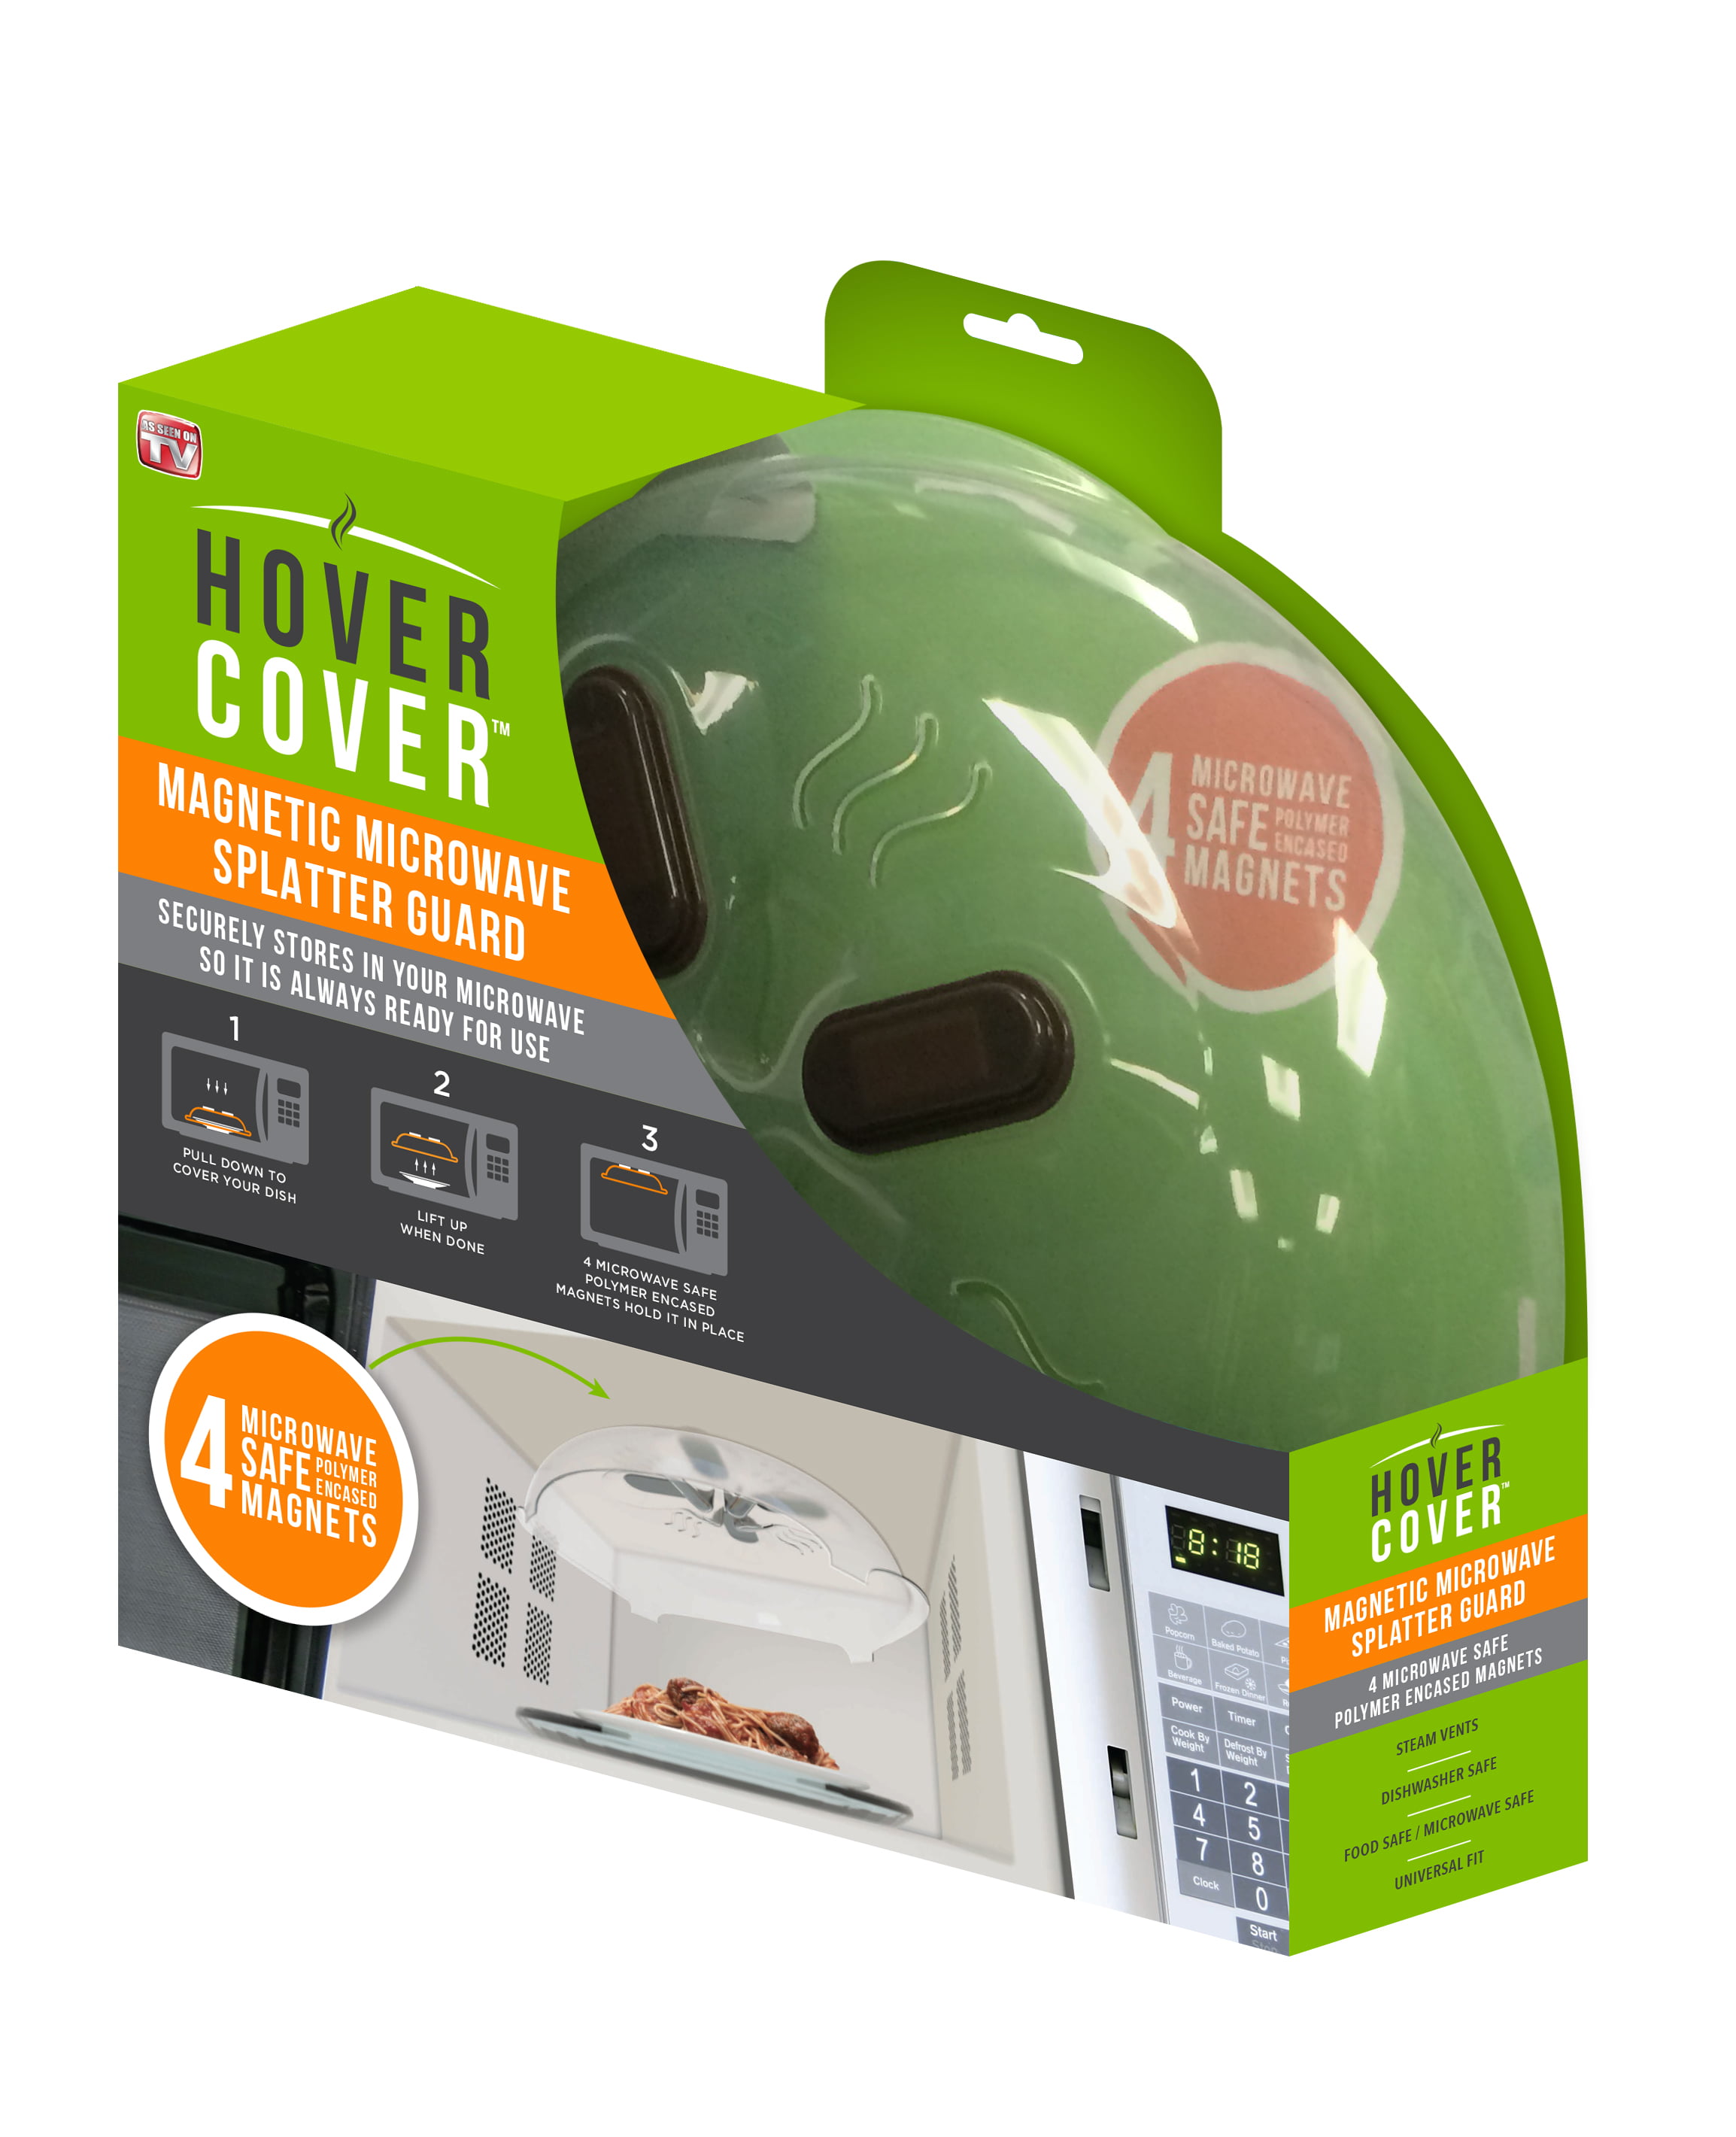 and Steam Vents 11.8 in Microwave Hover Anti-Sputtering Guard with Splatter Lid Magnetic Microwave Splatter Cover Dishwasher-Safe & BPA-Free Weiai Green